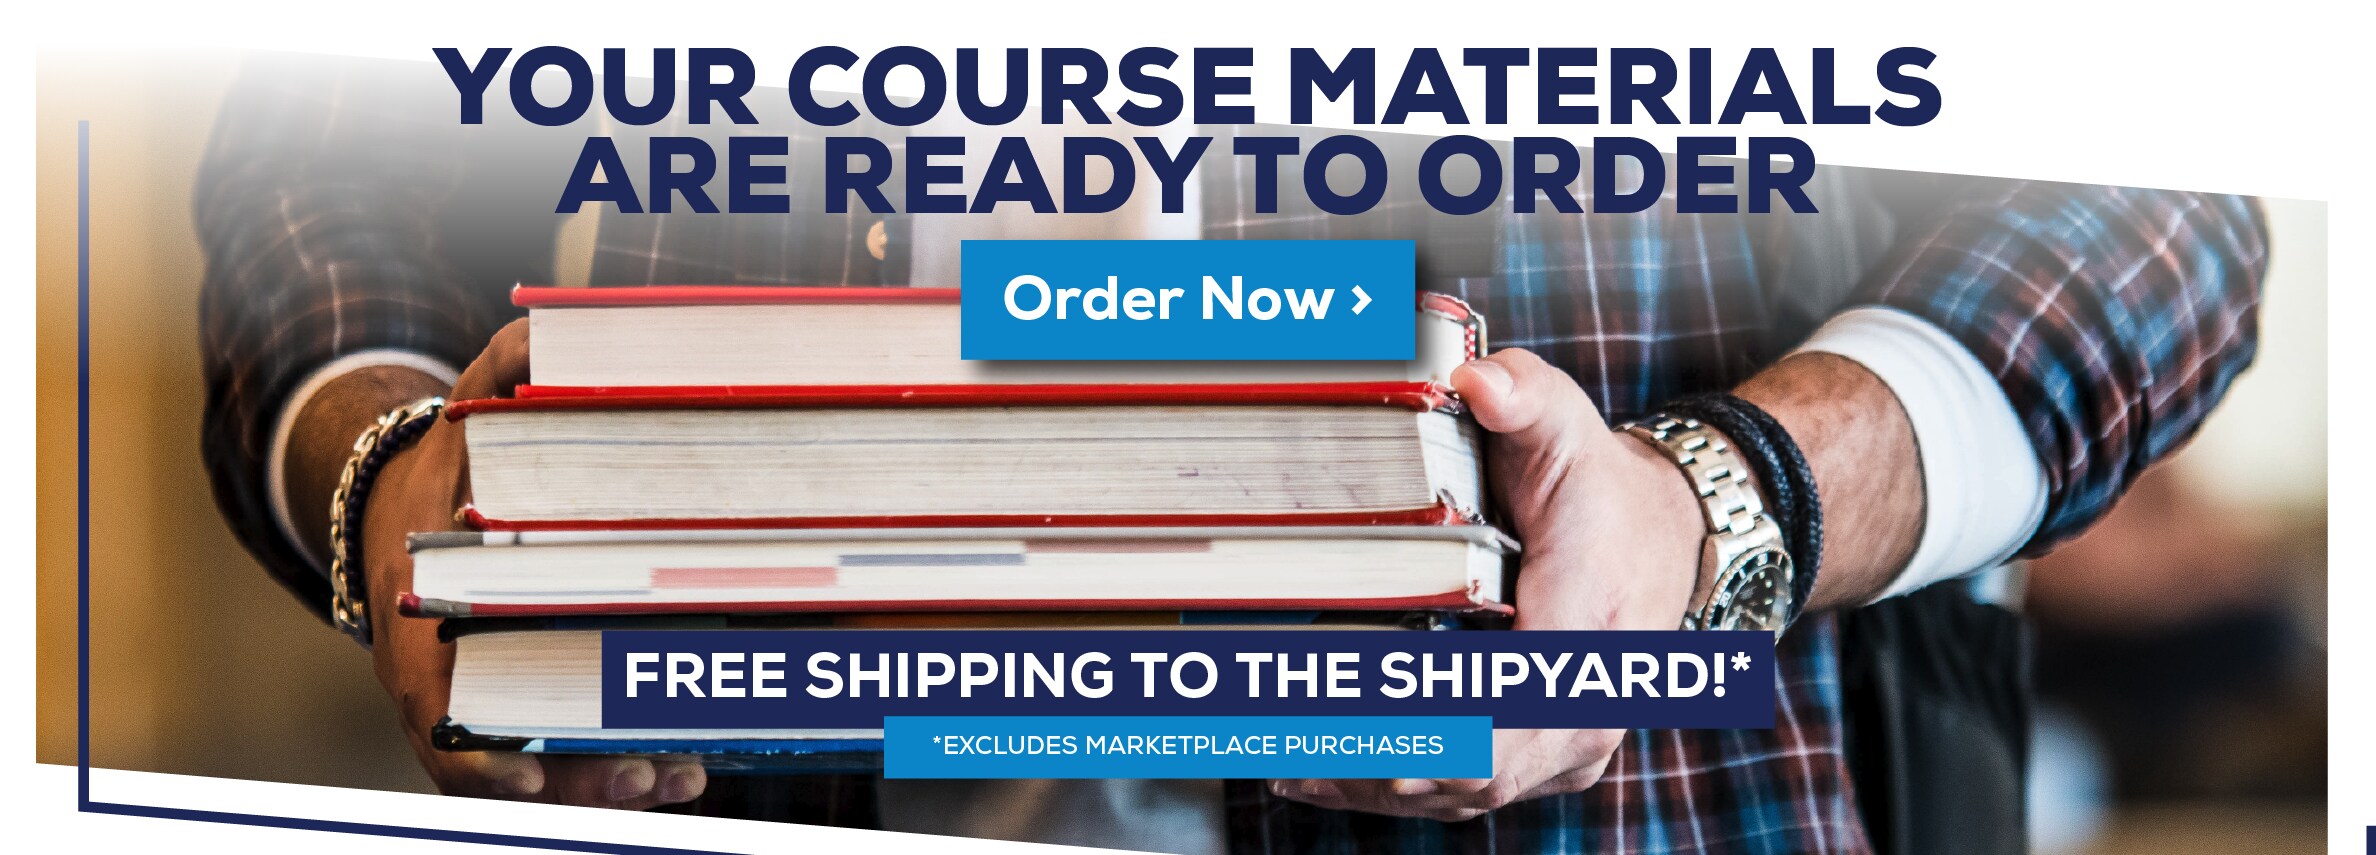 Your Course Materials are Ready to Order. Order Now. Free shipping on orders to the Shipyard! *Excludes marketplace purchases.